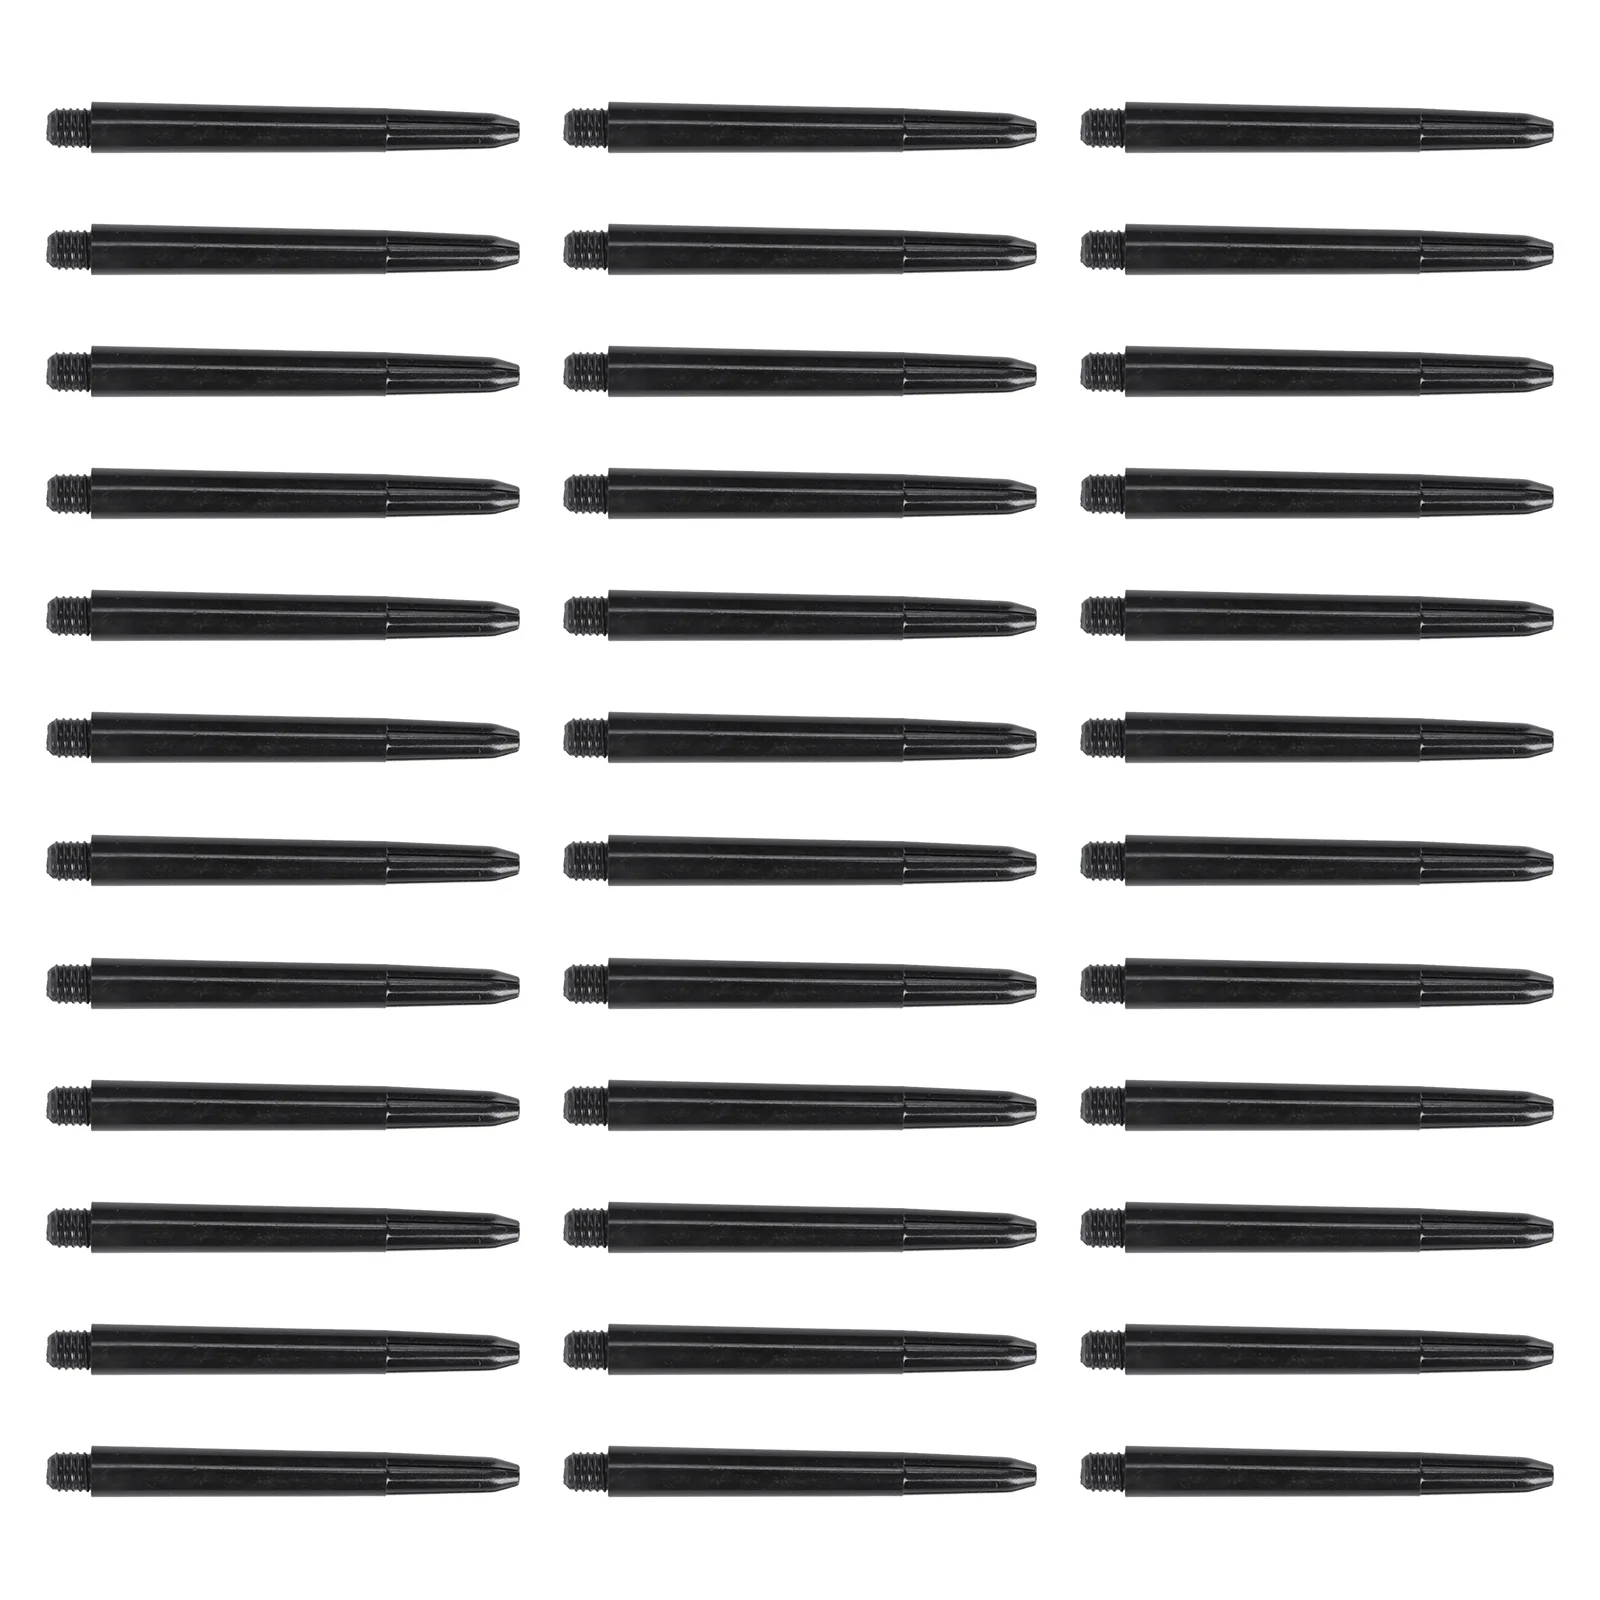 

100 Pcs Black Outfit Throwing Toy Dart Tip Replacements Dart Board Shafts Plastic Stems Dart Shaft Thread Size